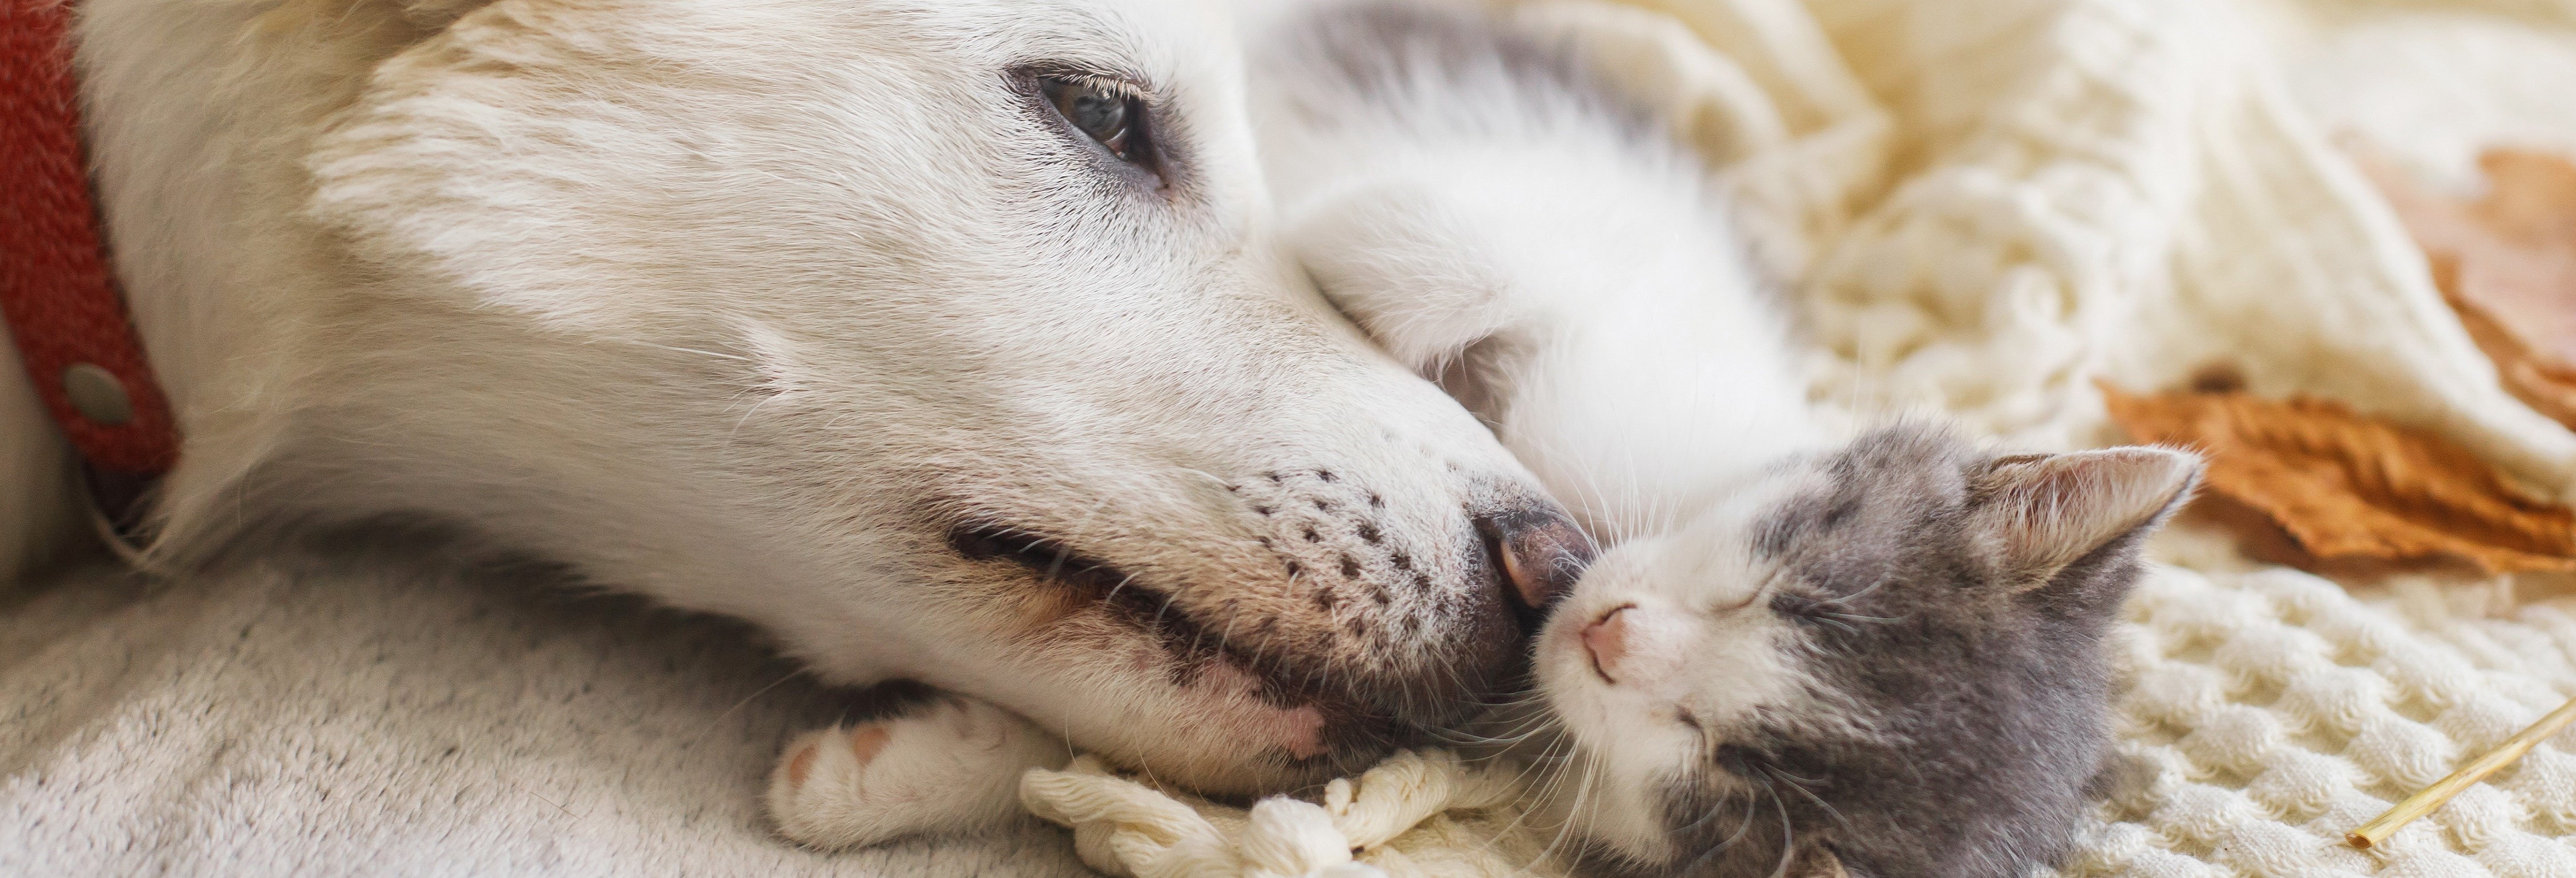 Dog and Kitten Snuggling